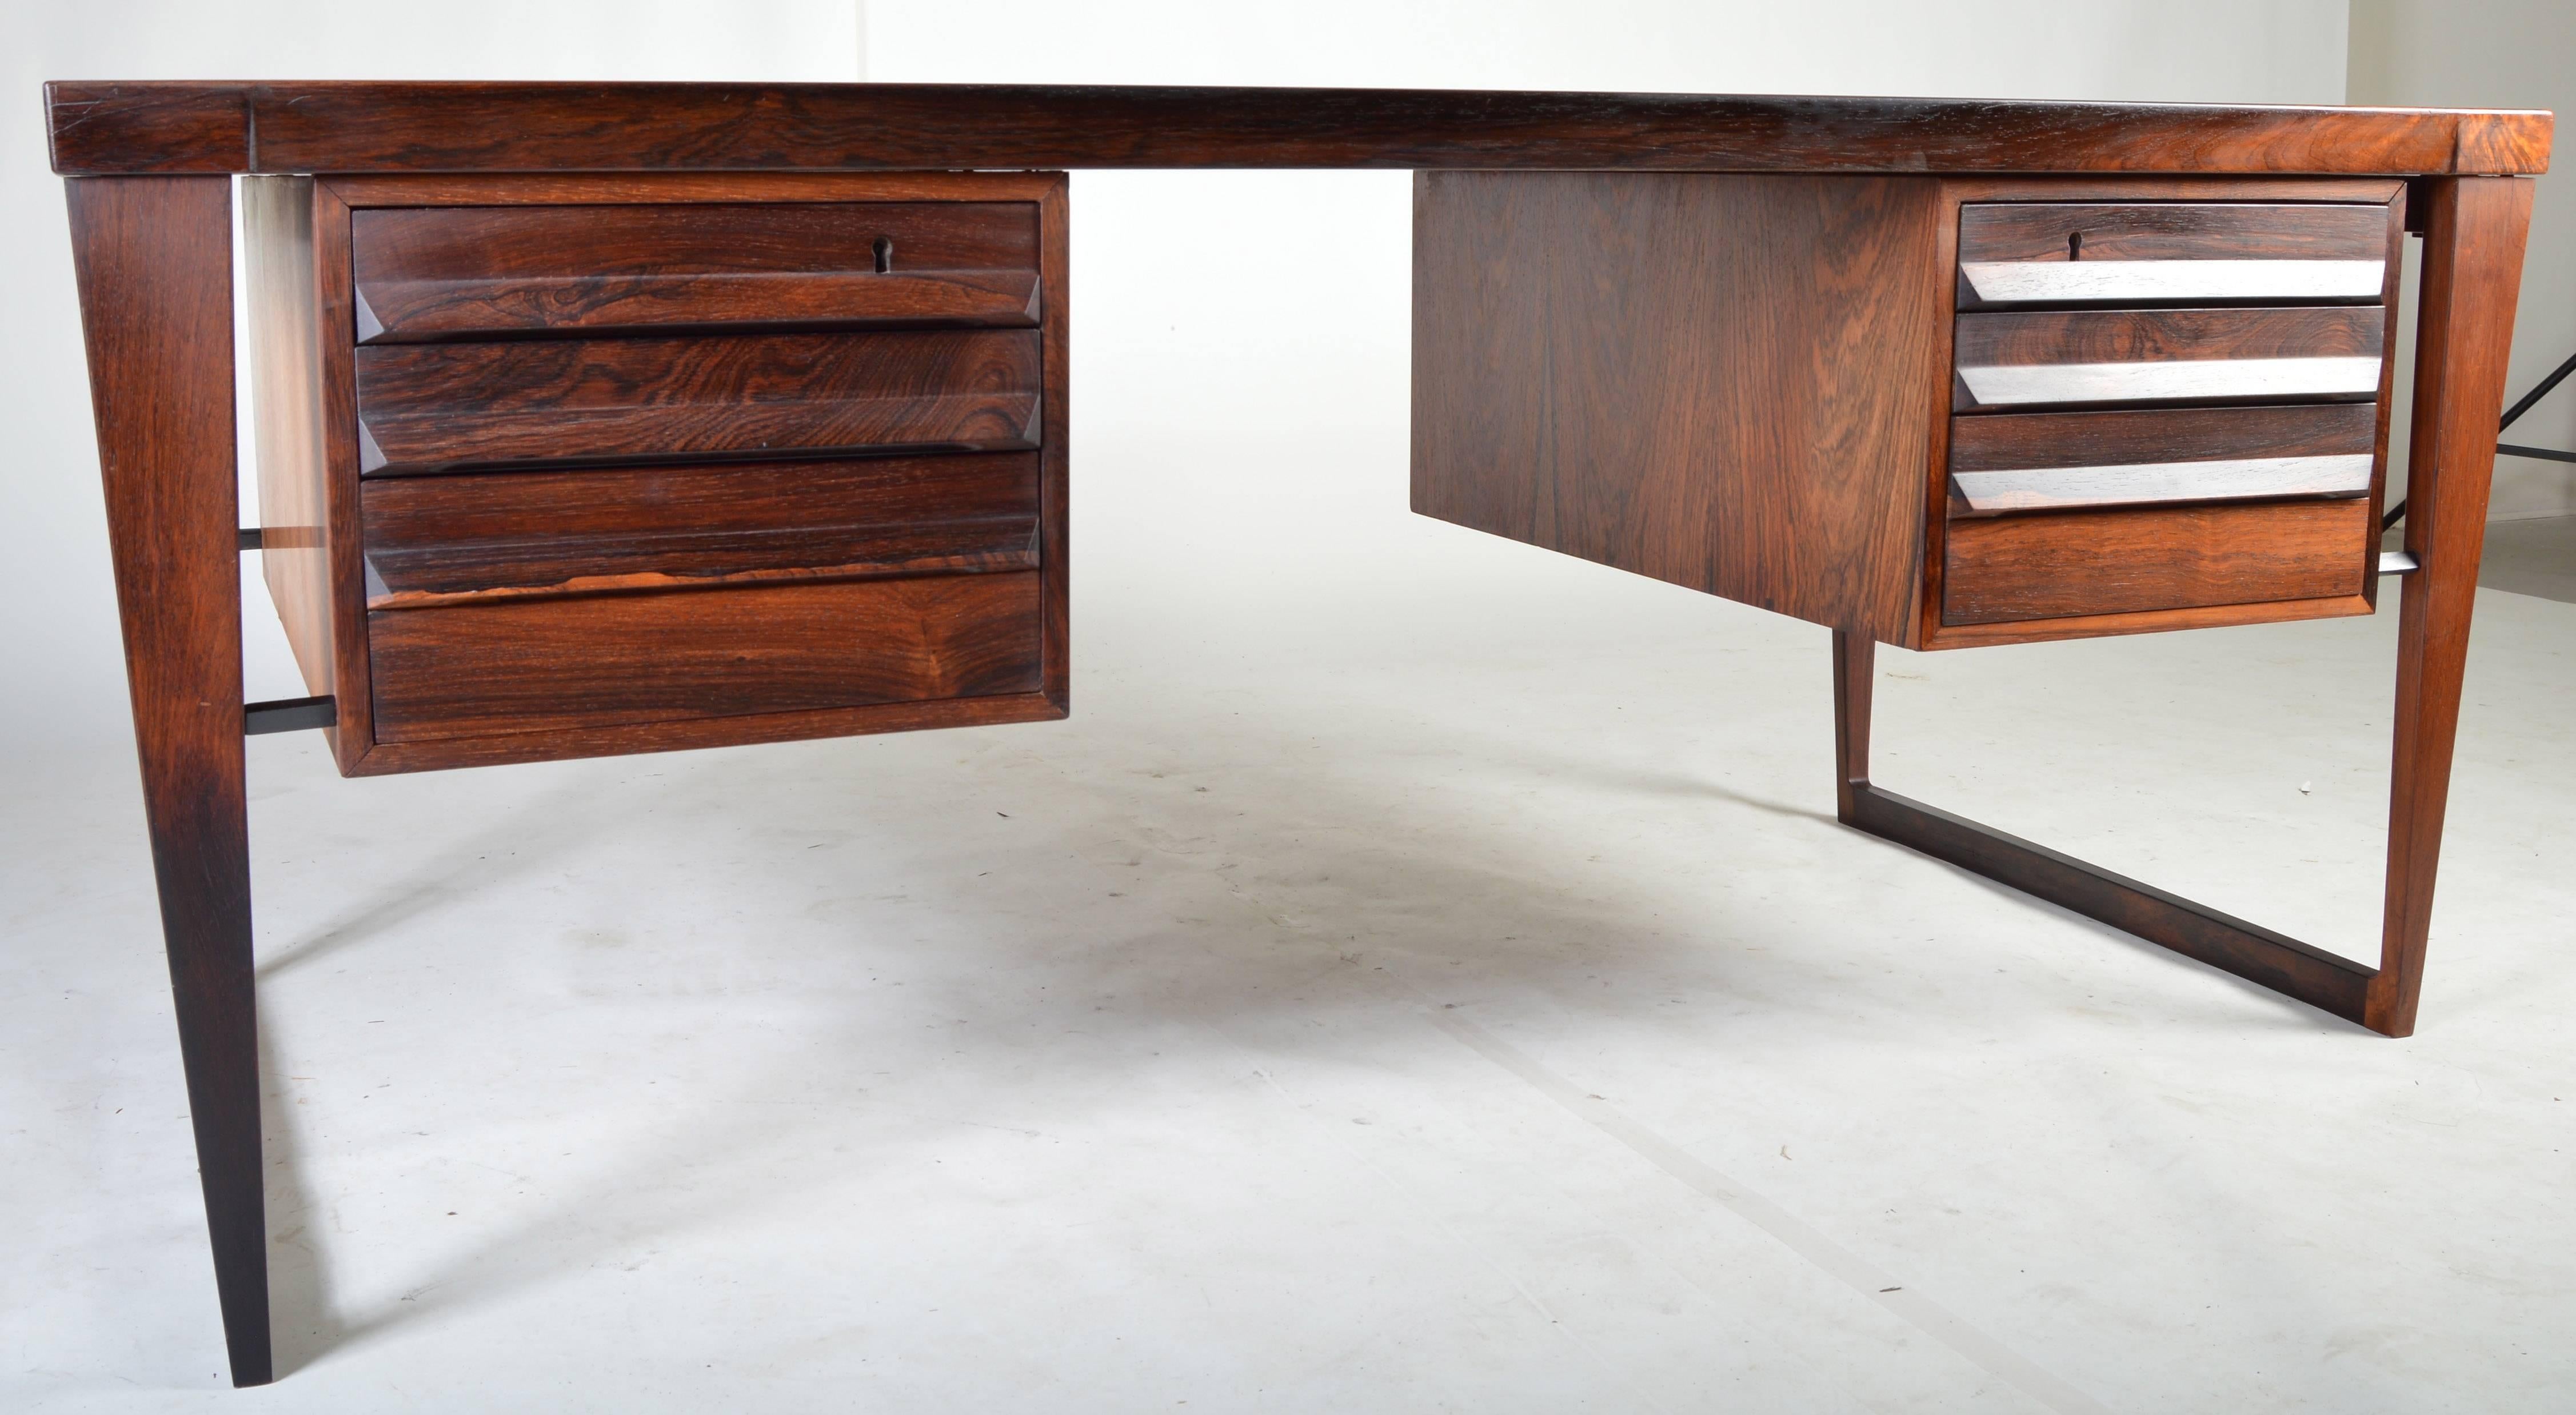 A rare and incredibly striking mid-century desk in Rosewood designed by Kai Kristiansen. A personal favorite in design, this timeless desk features sleek and simple lines while providing ample storage, surface space and functionality. 

Chair